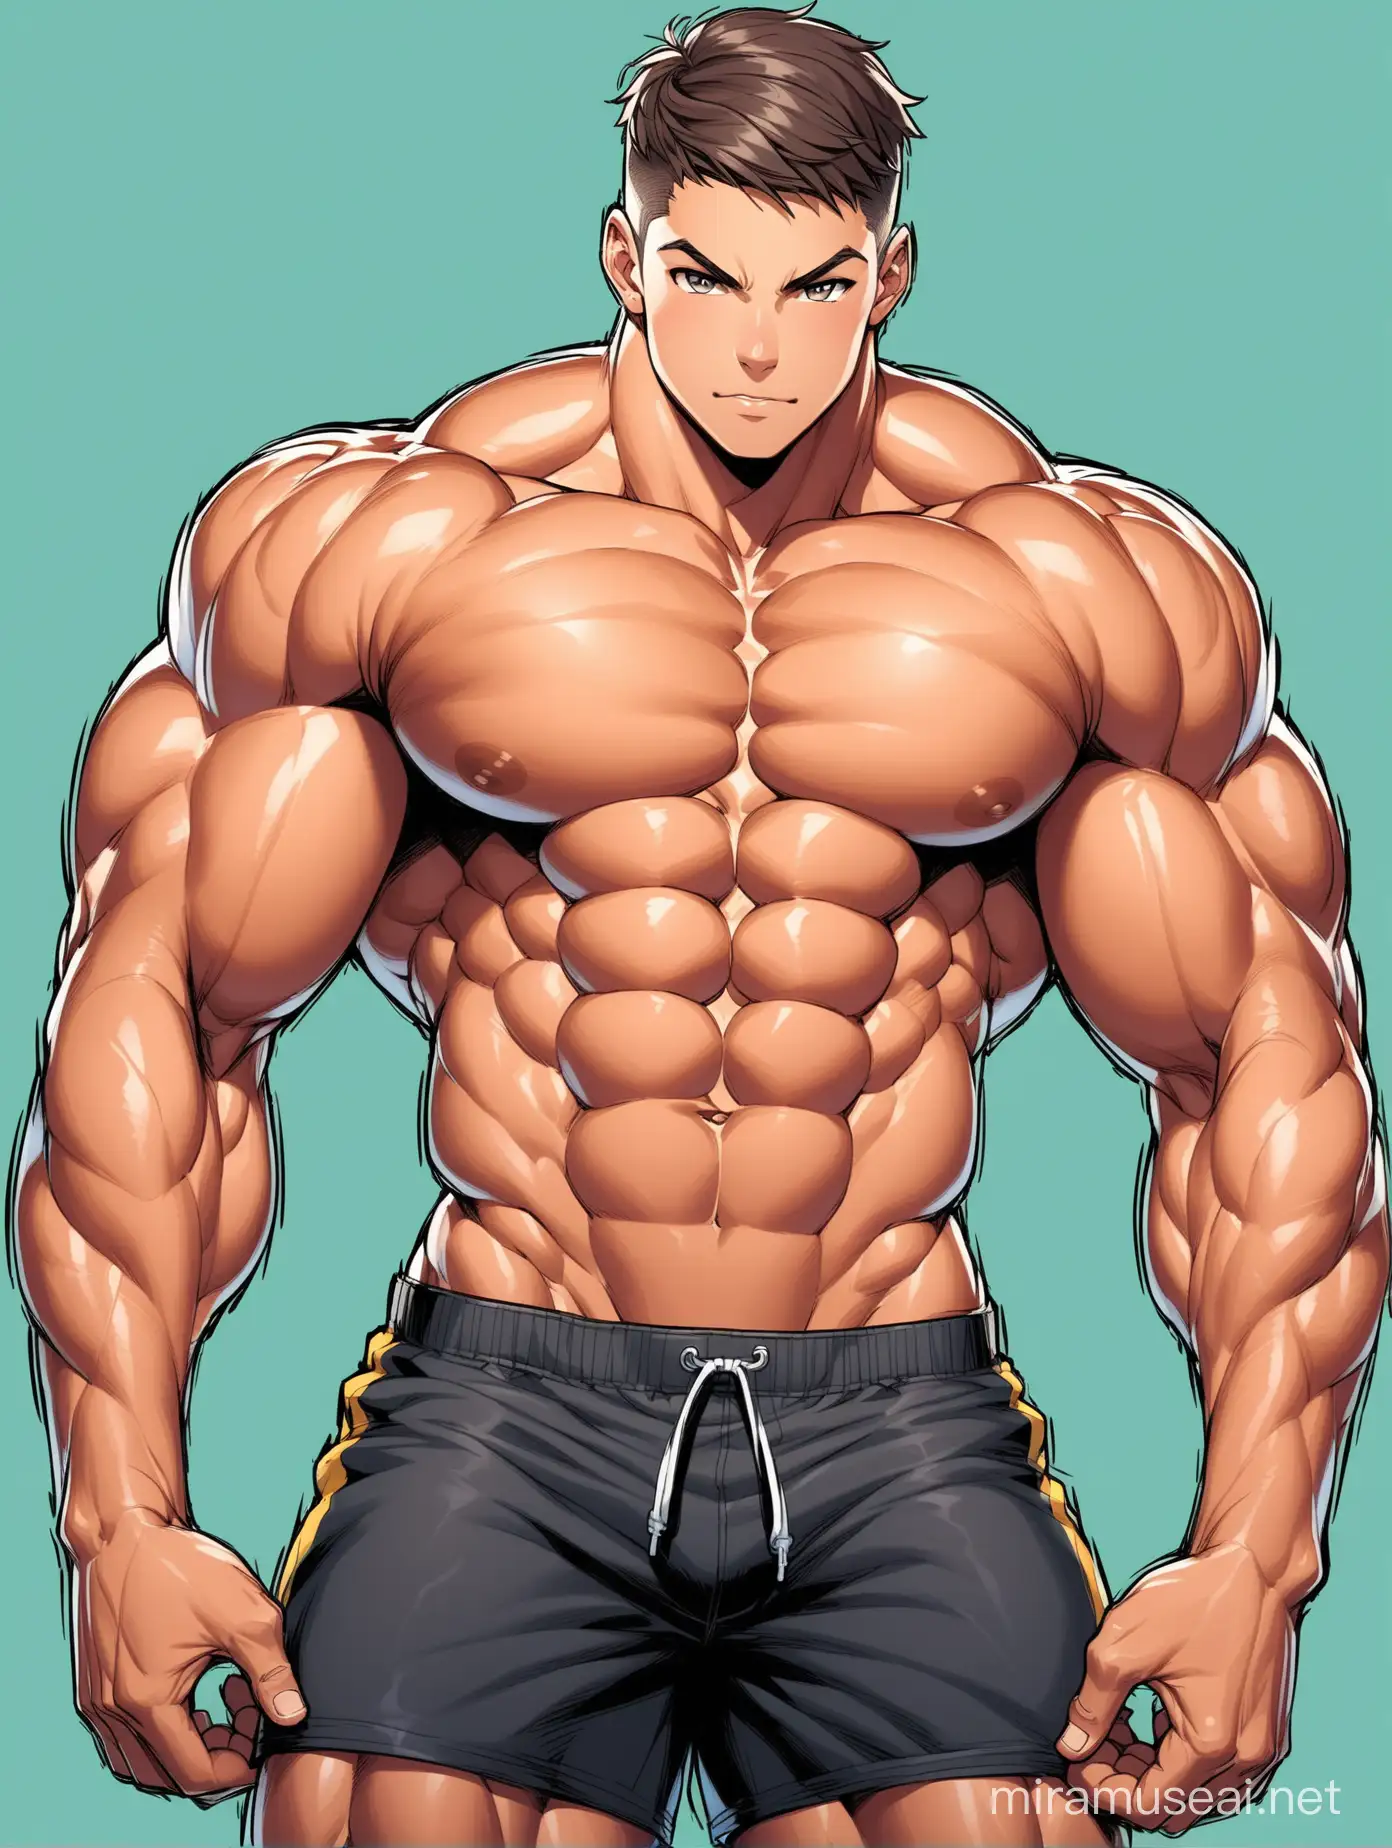 Vibrant Drawing of a Muscular Teenage Male with Striking Features